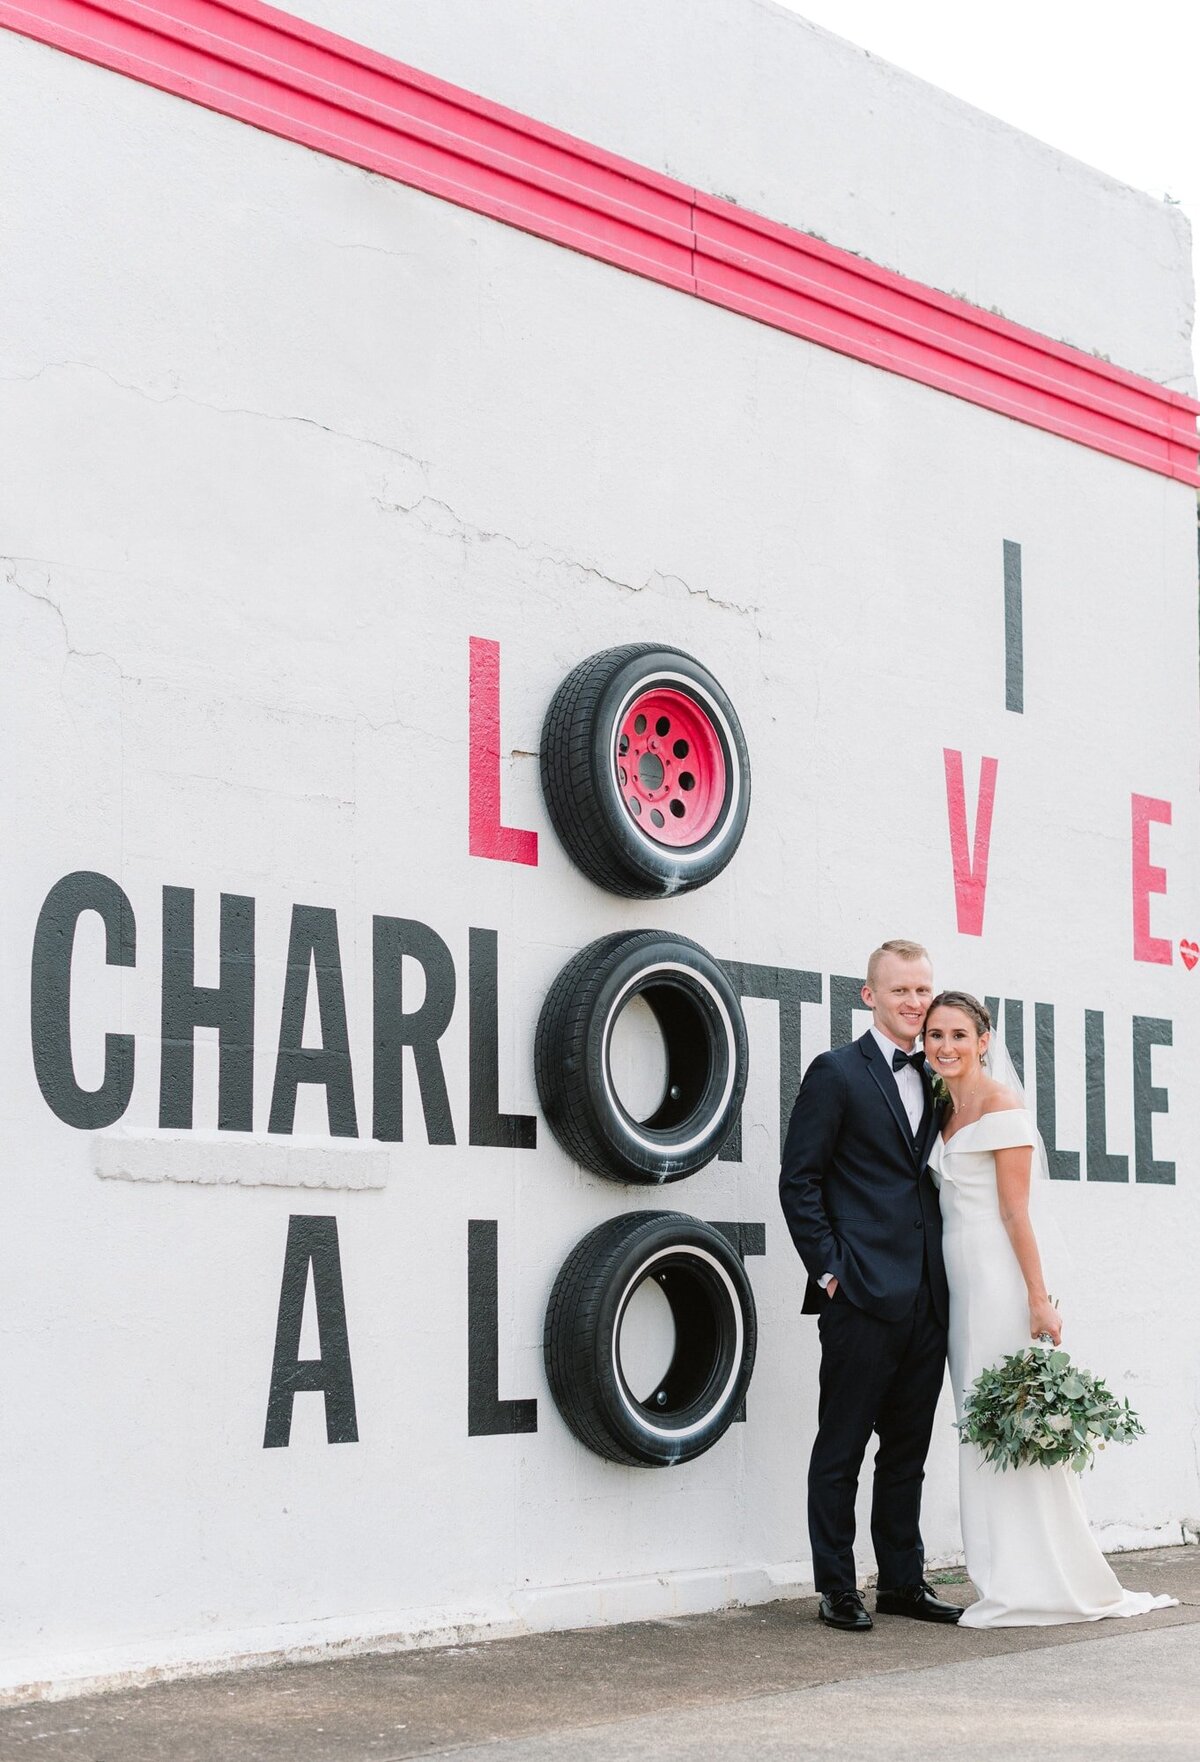 Bride and groom smile in front of I Love Charlottesville A Lot sign